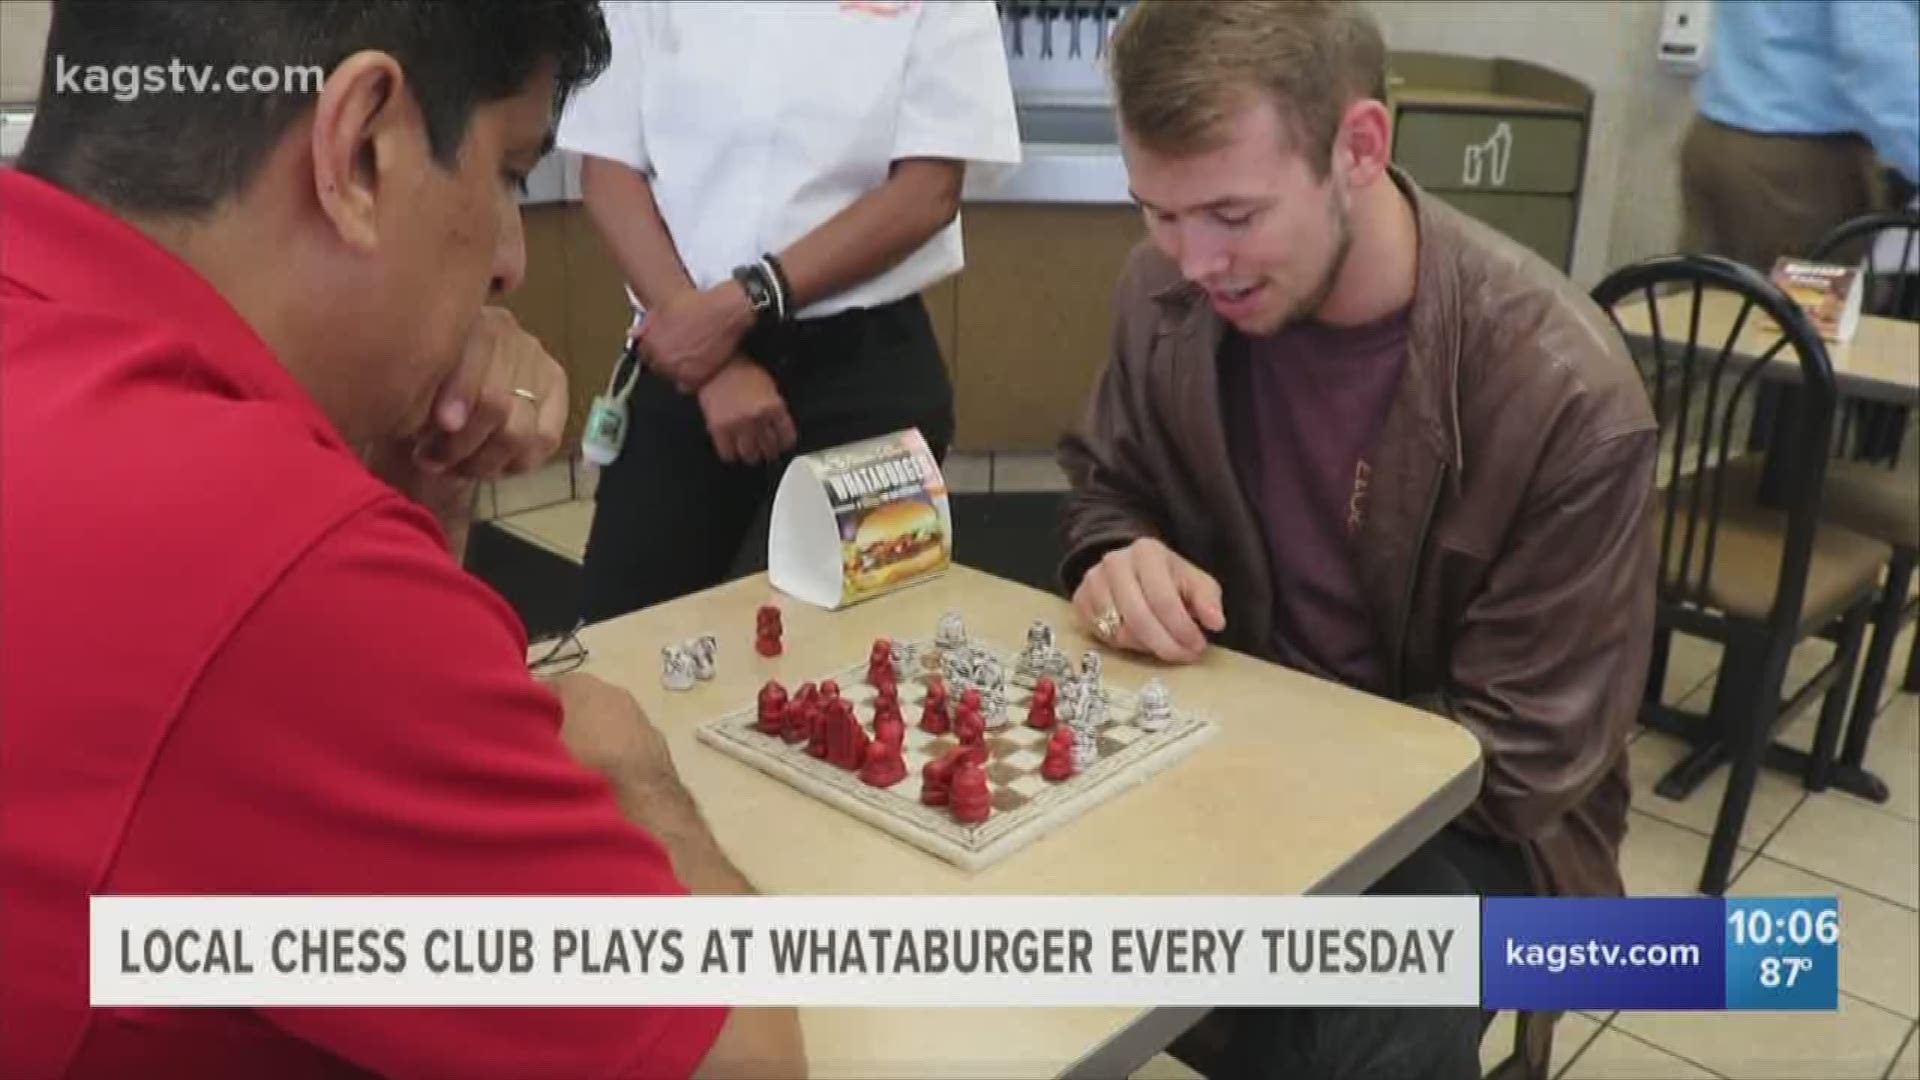 Burgers, bishops, and strategy both in and out of local fast food booths. That's what you'll find most Tuesday nights at a Whataburger here in Bryan. Our own Lisa Primrose met with the chess club that started it all.